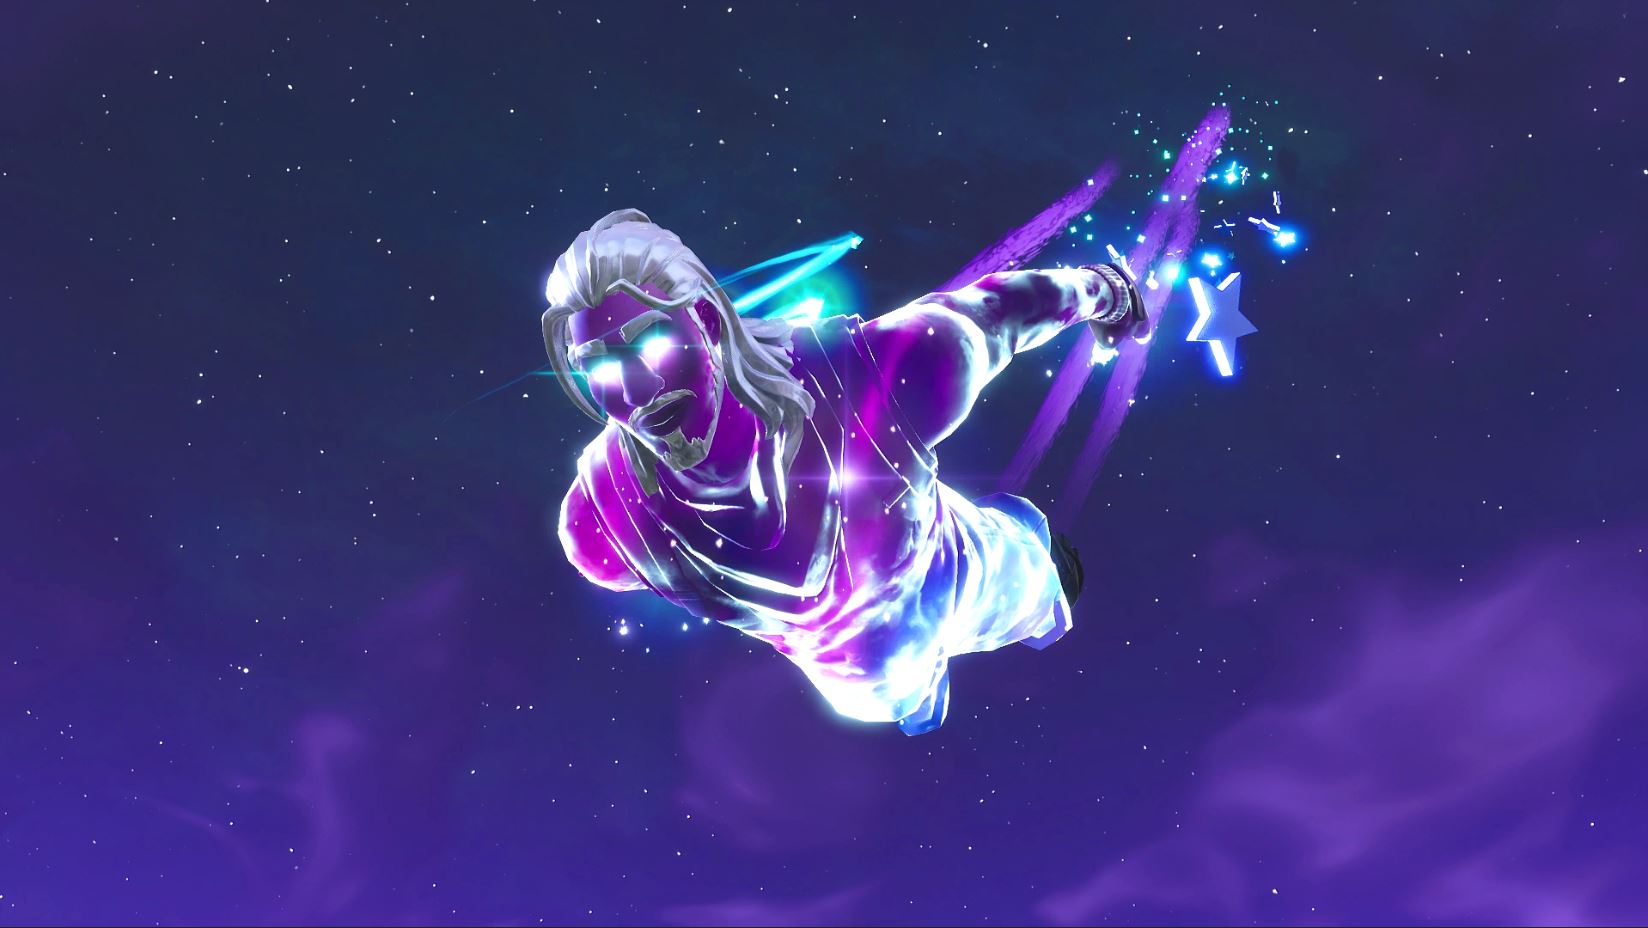 Top 25 Fortnite Best Skin Combos That Look Freakin Awesome Gamers